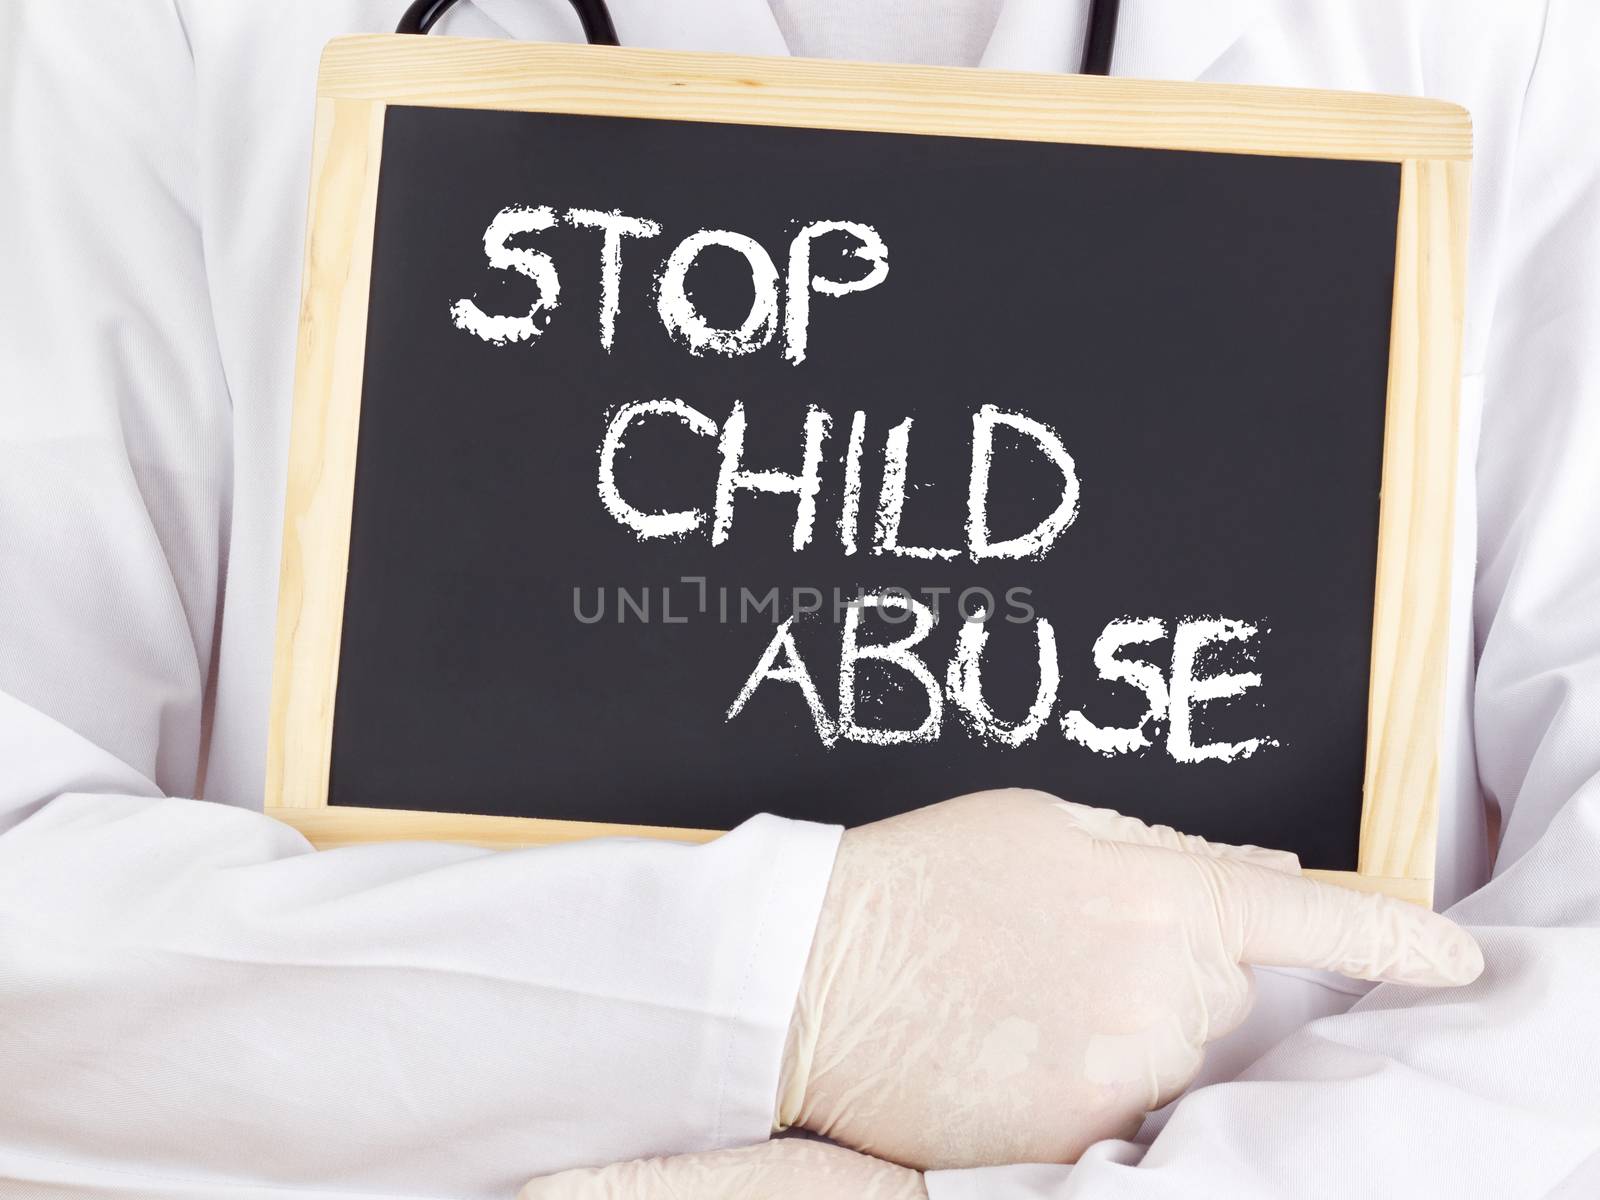 Doctor shows information: Stop Child Abuse by gwolters